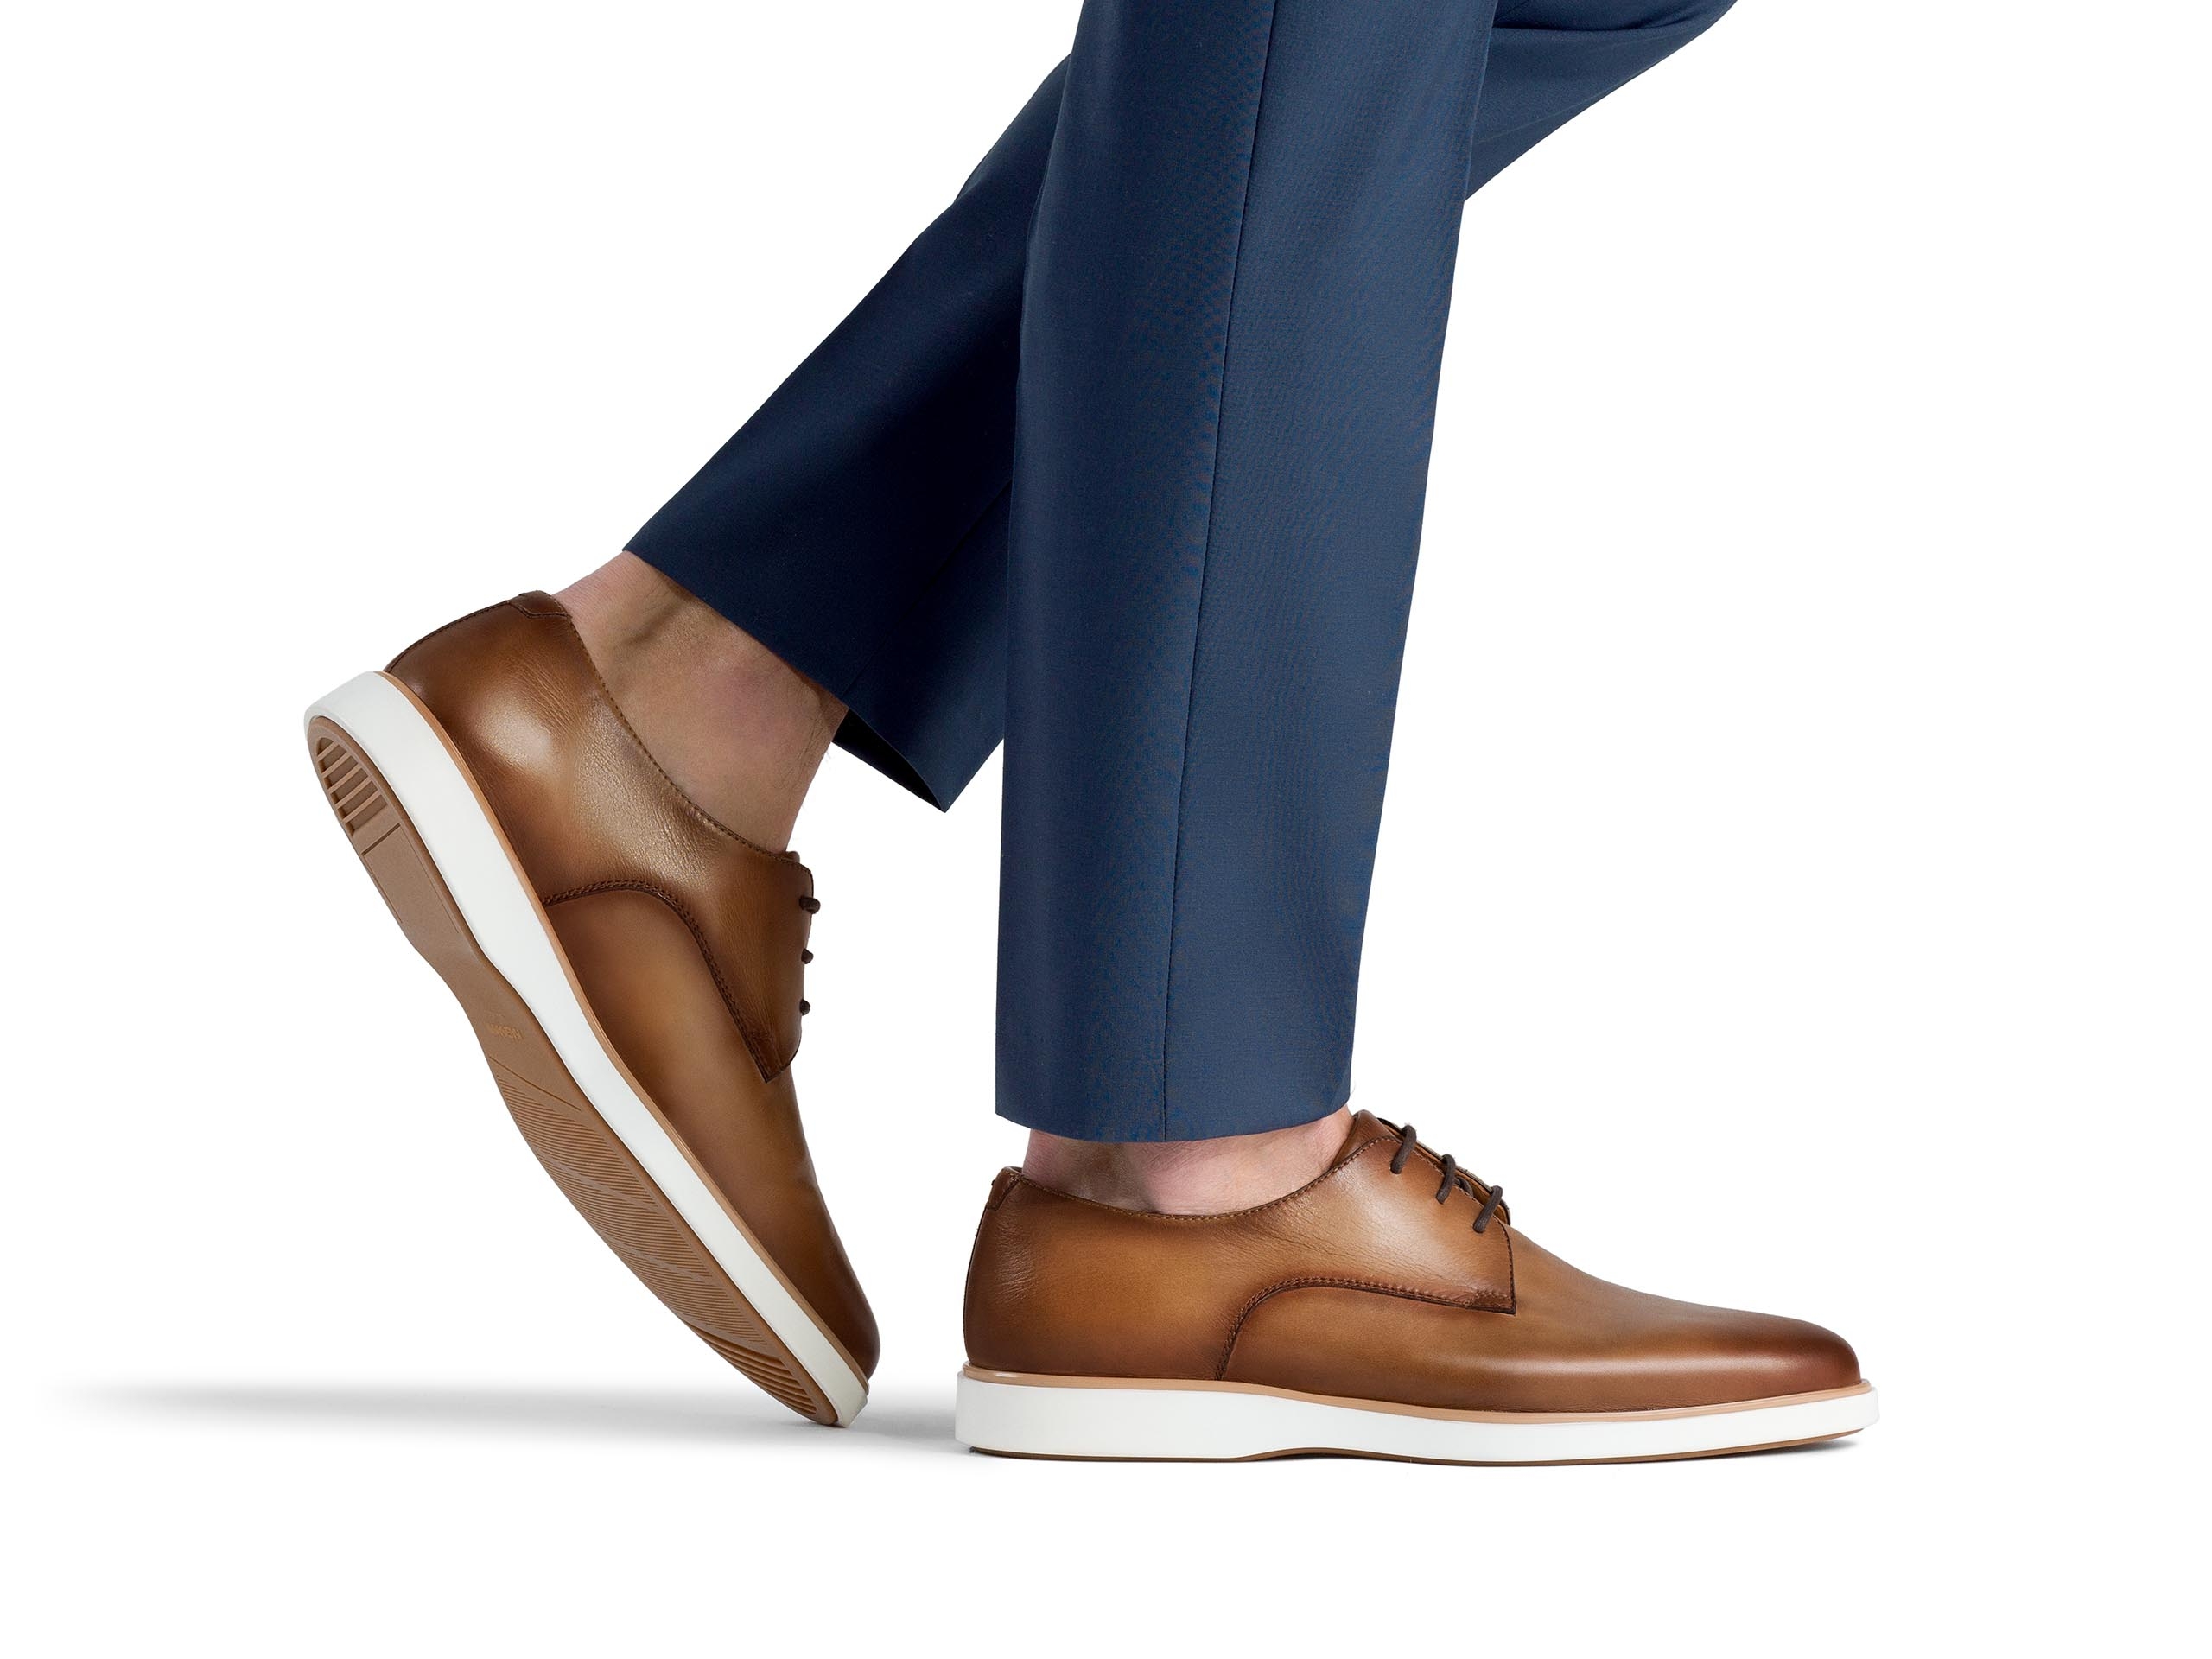 The Leone Brown pairs well with navy dress pants